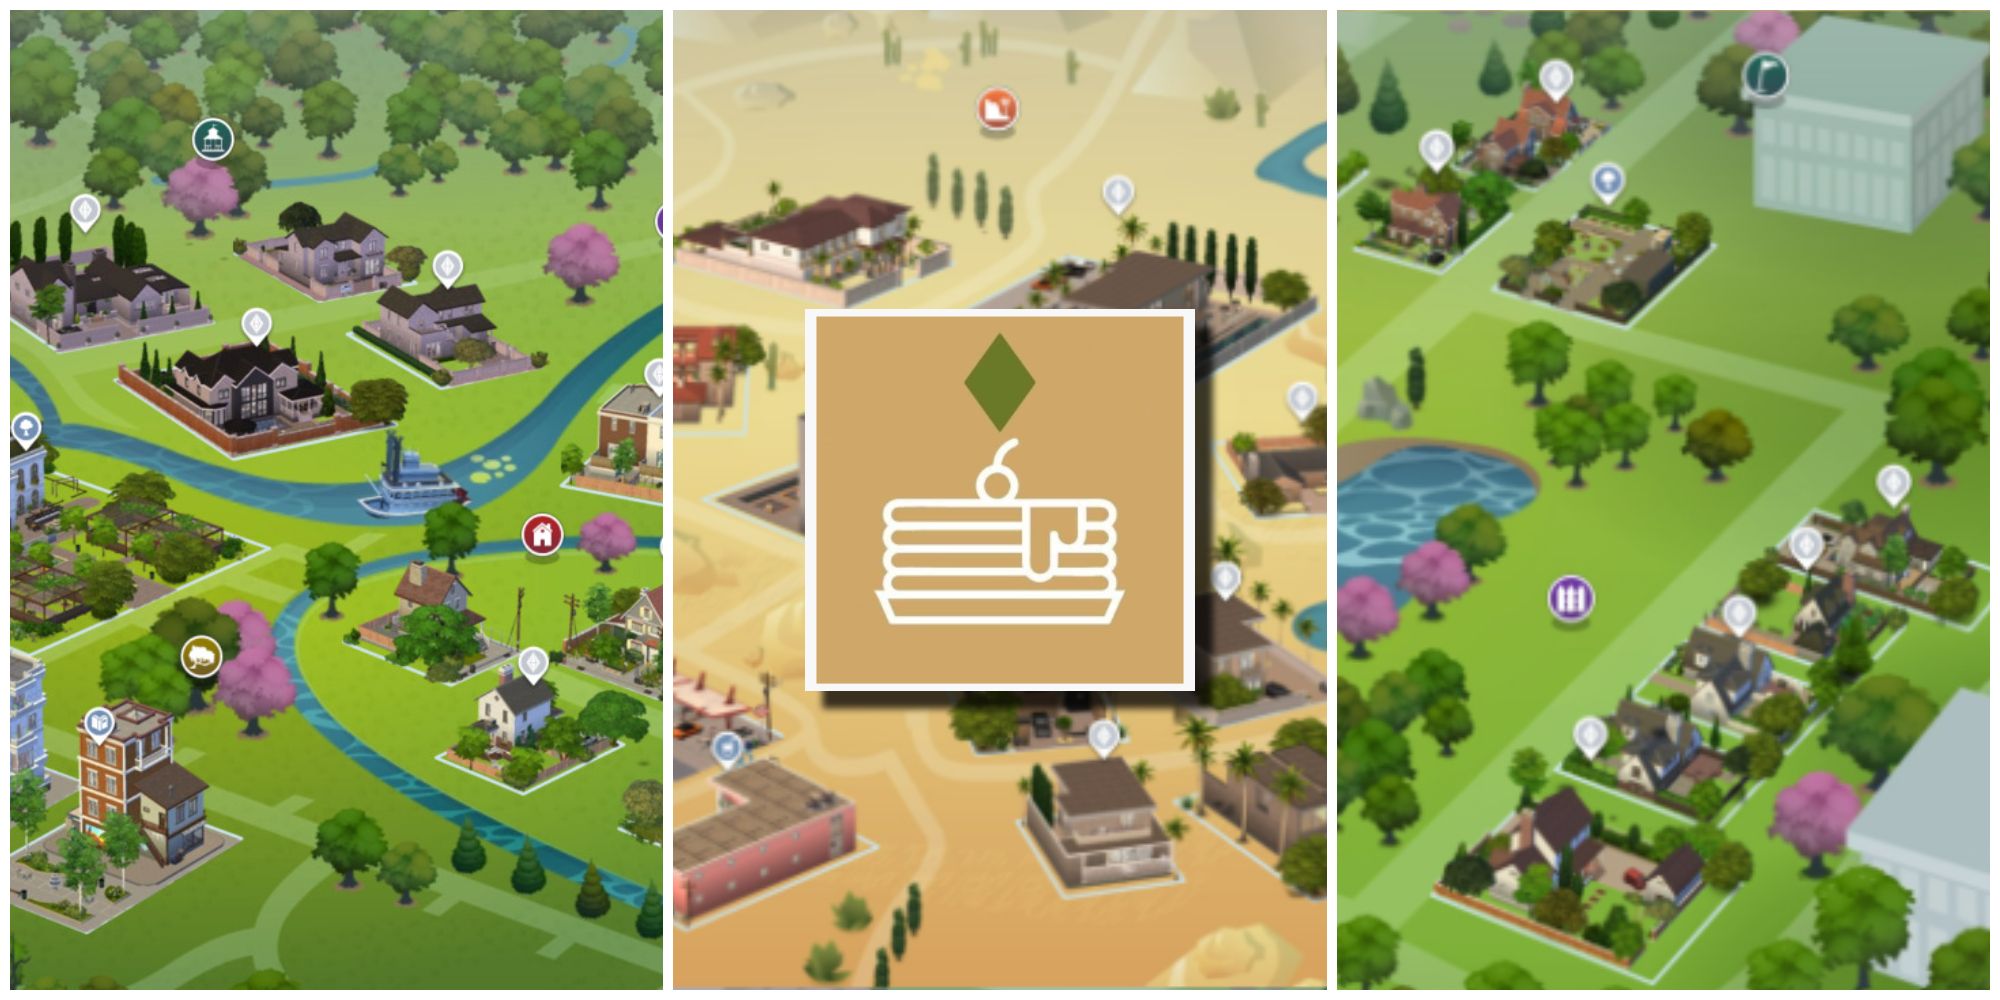 Charly Pancakes' 10 Years Later save file that makes over three different base game worlds in The Sims 4